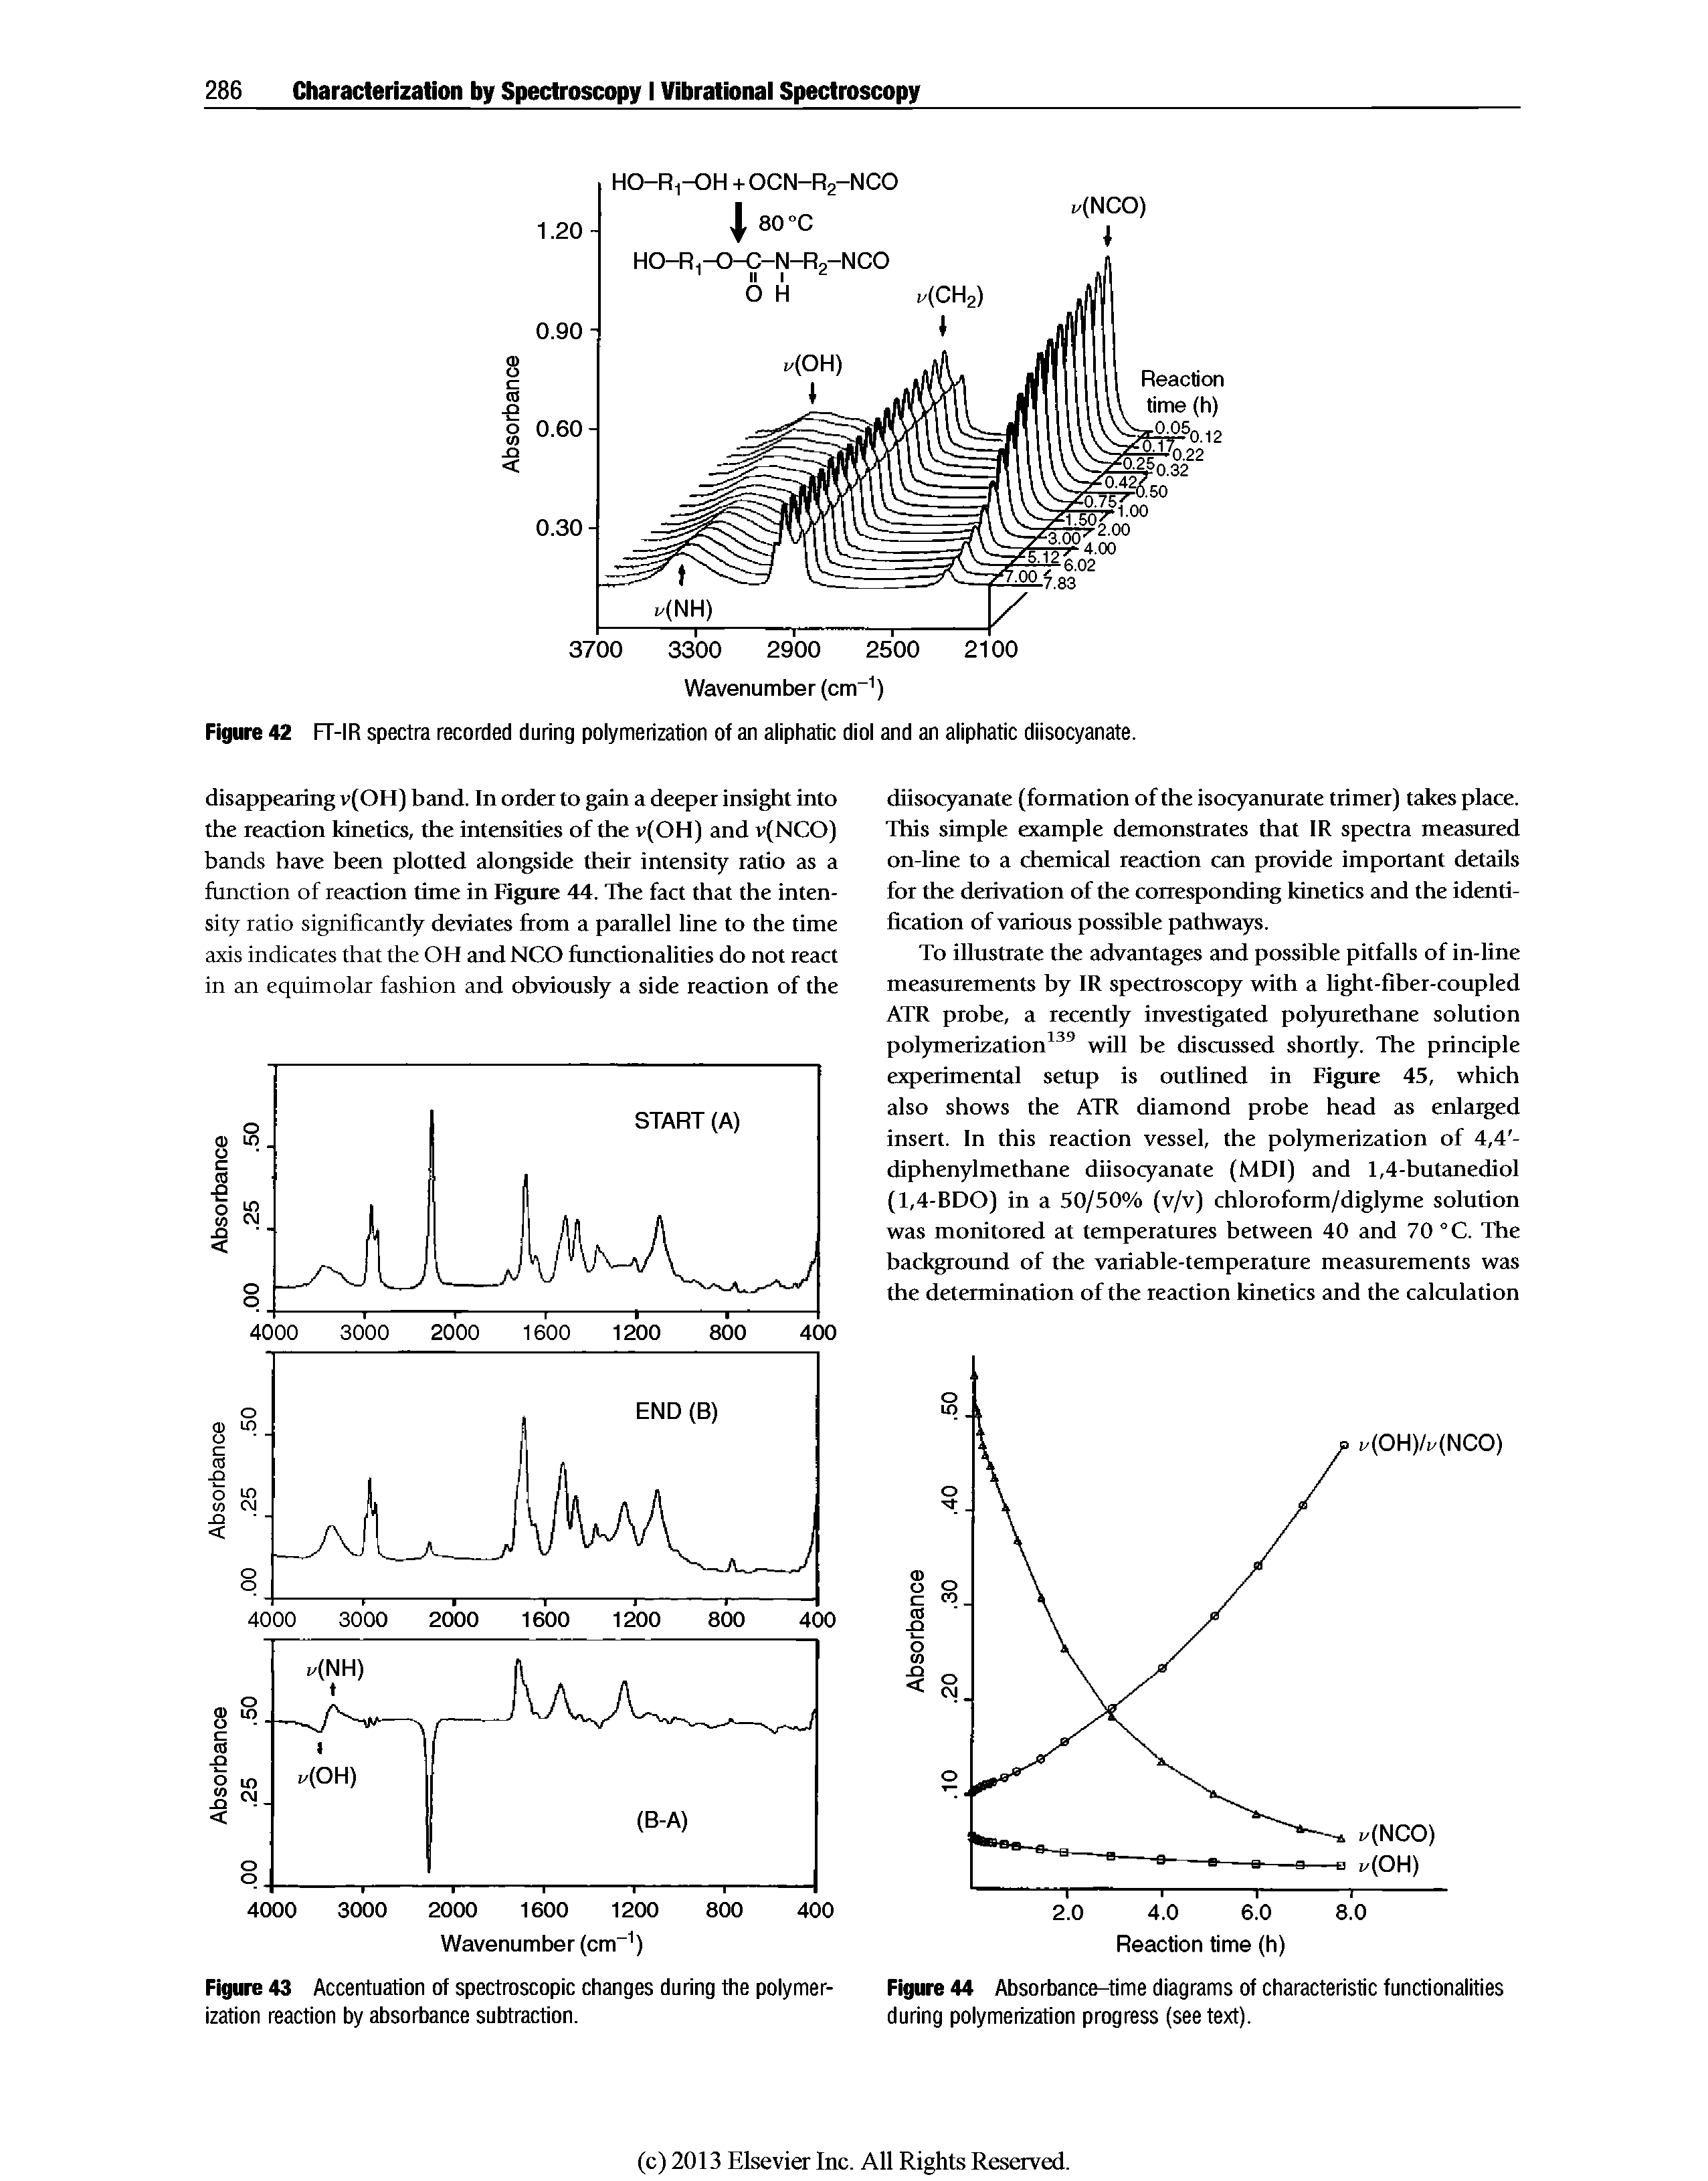 Figure 44 Absorbance-time diagrams of characteristic functionalities during polymerization progress (see text).